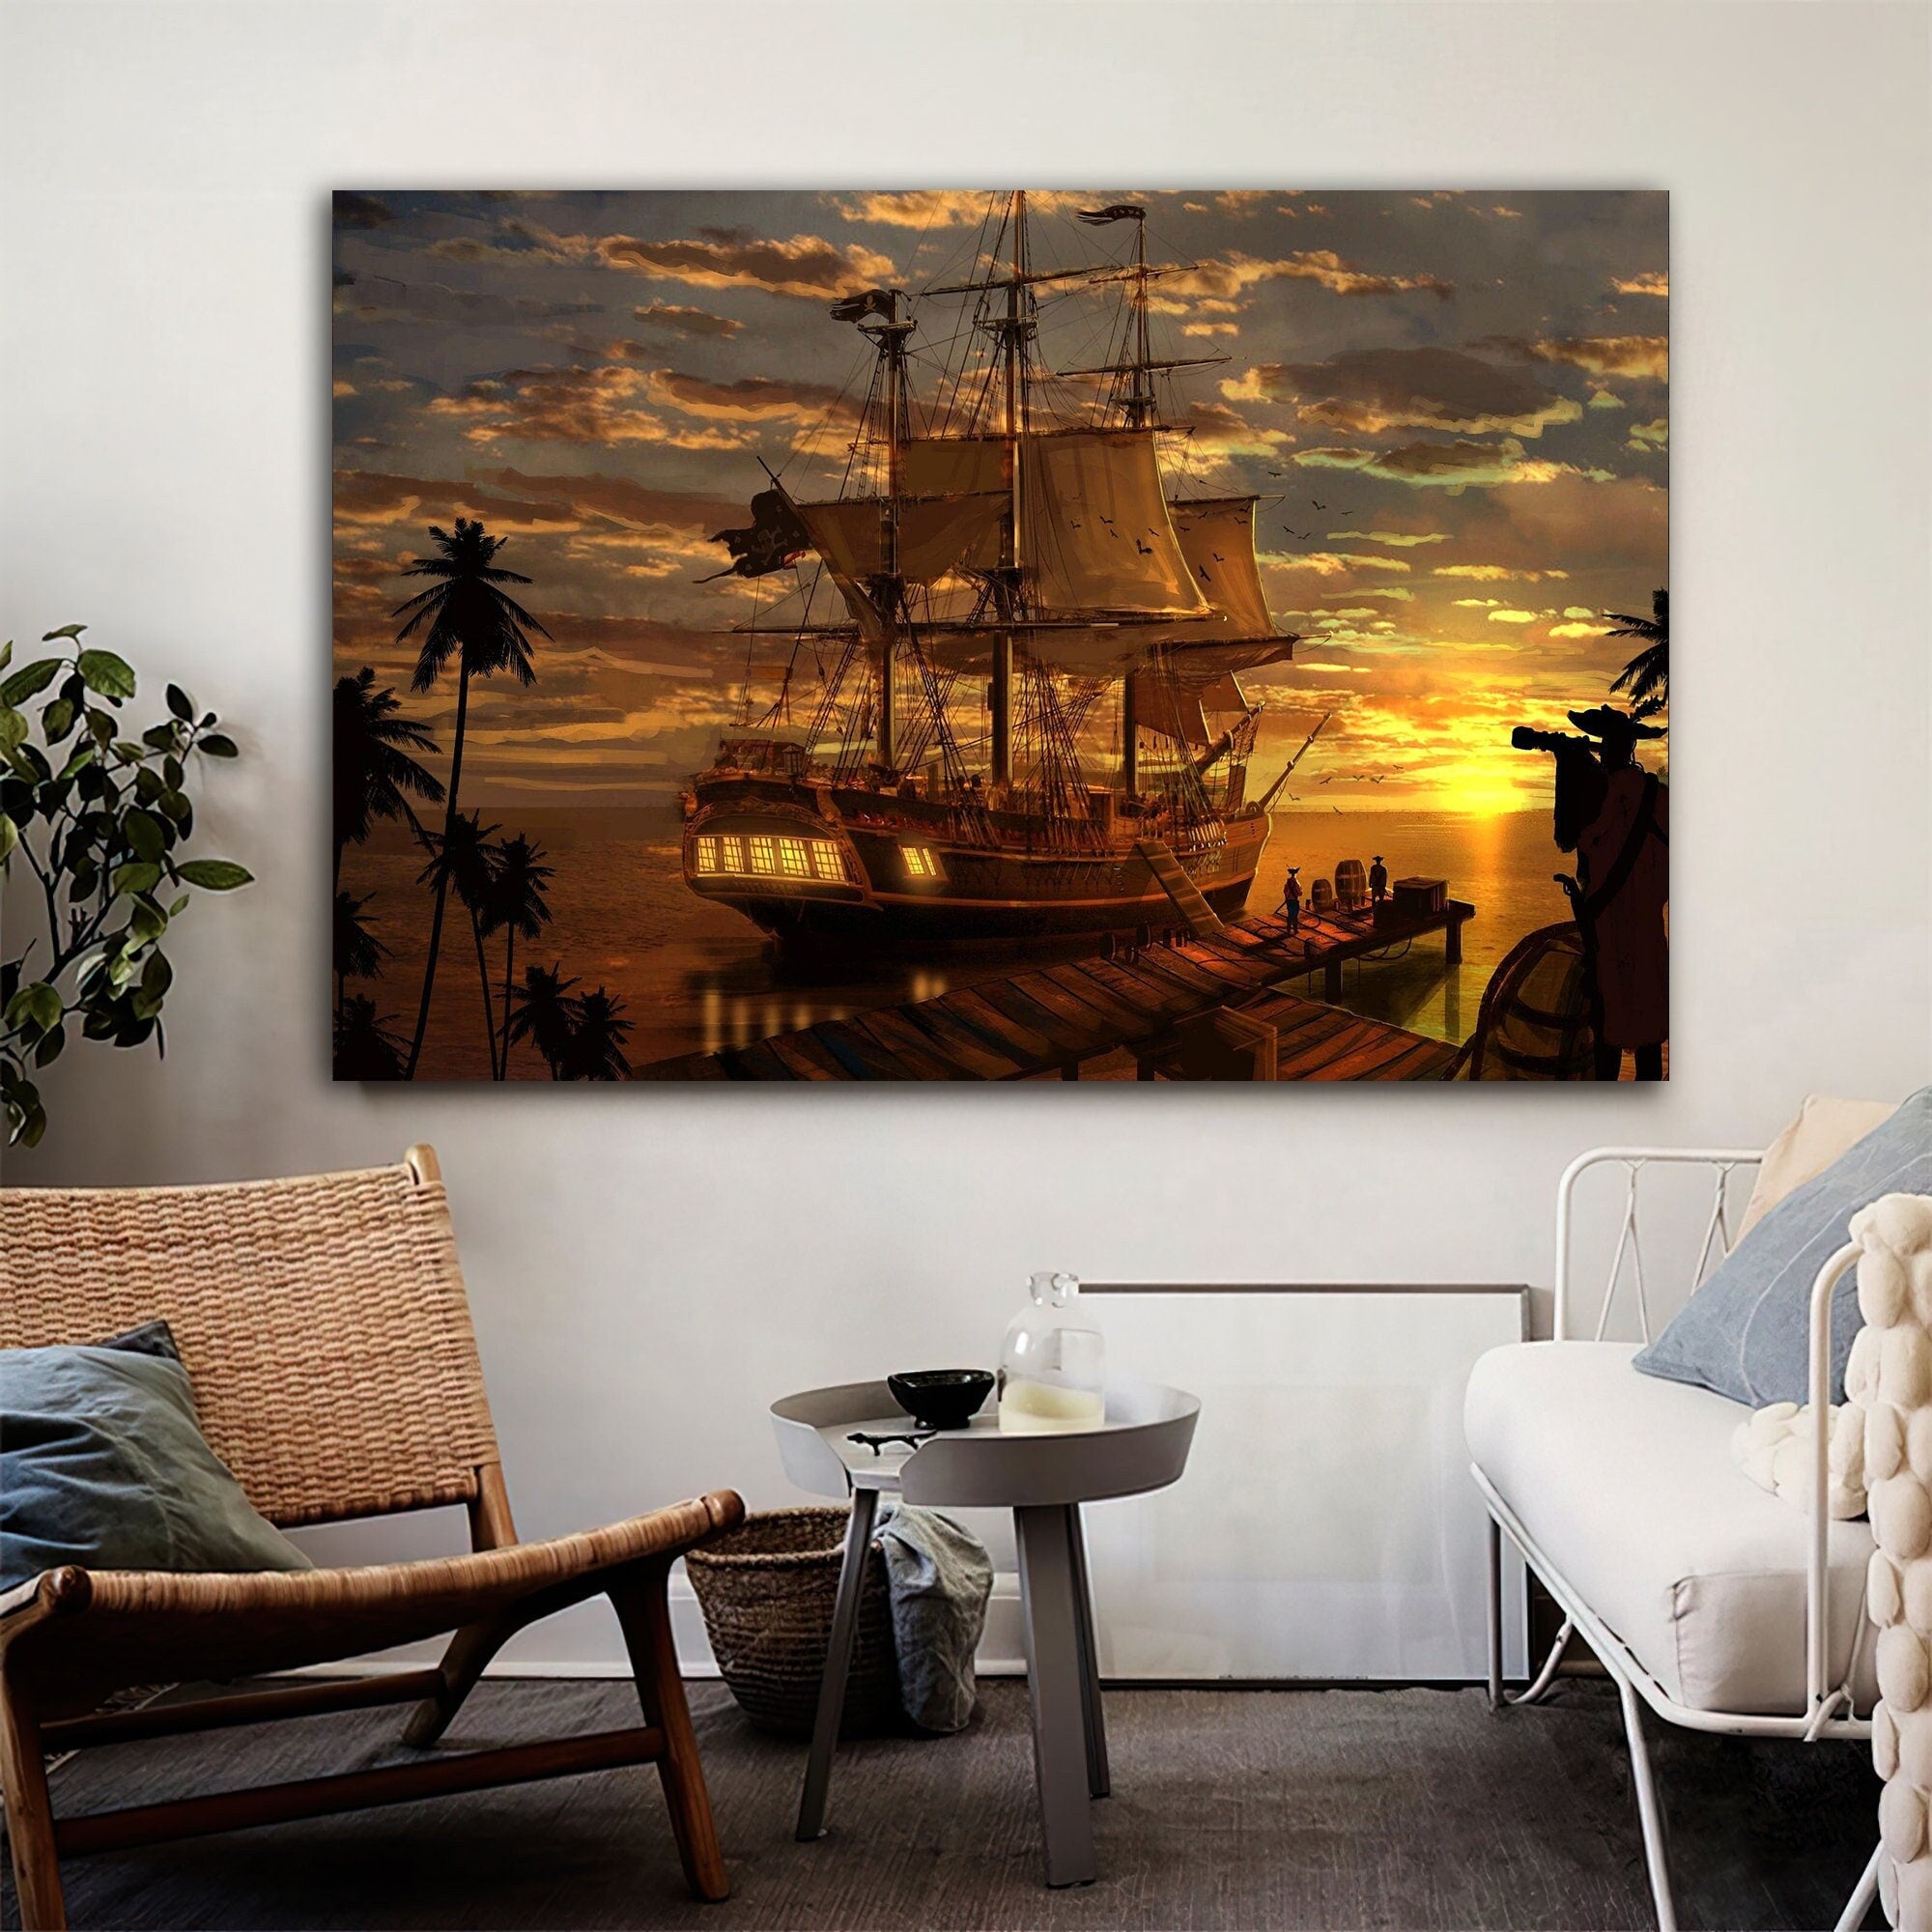 ship canvas painting, pirate ship painting, sailing painting, boating ship painting, rowing boat painting, ships canvas painting, Art Prints